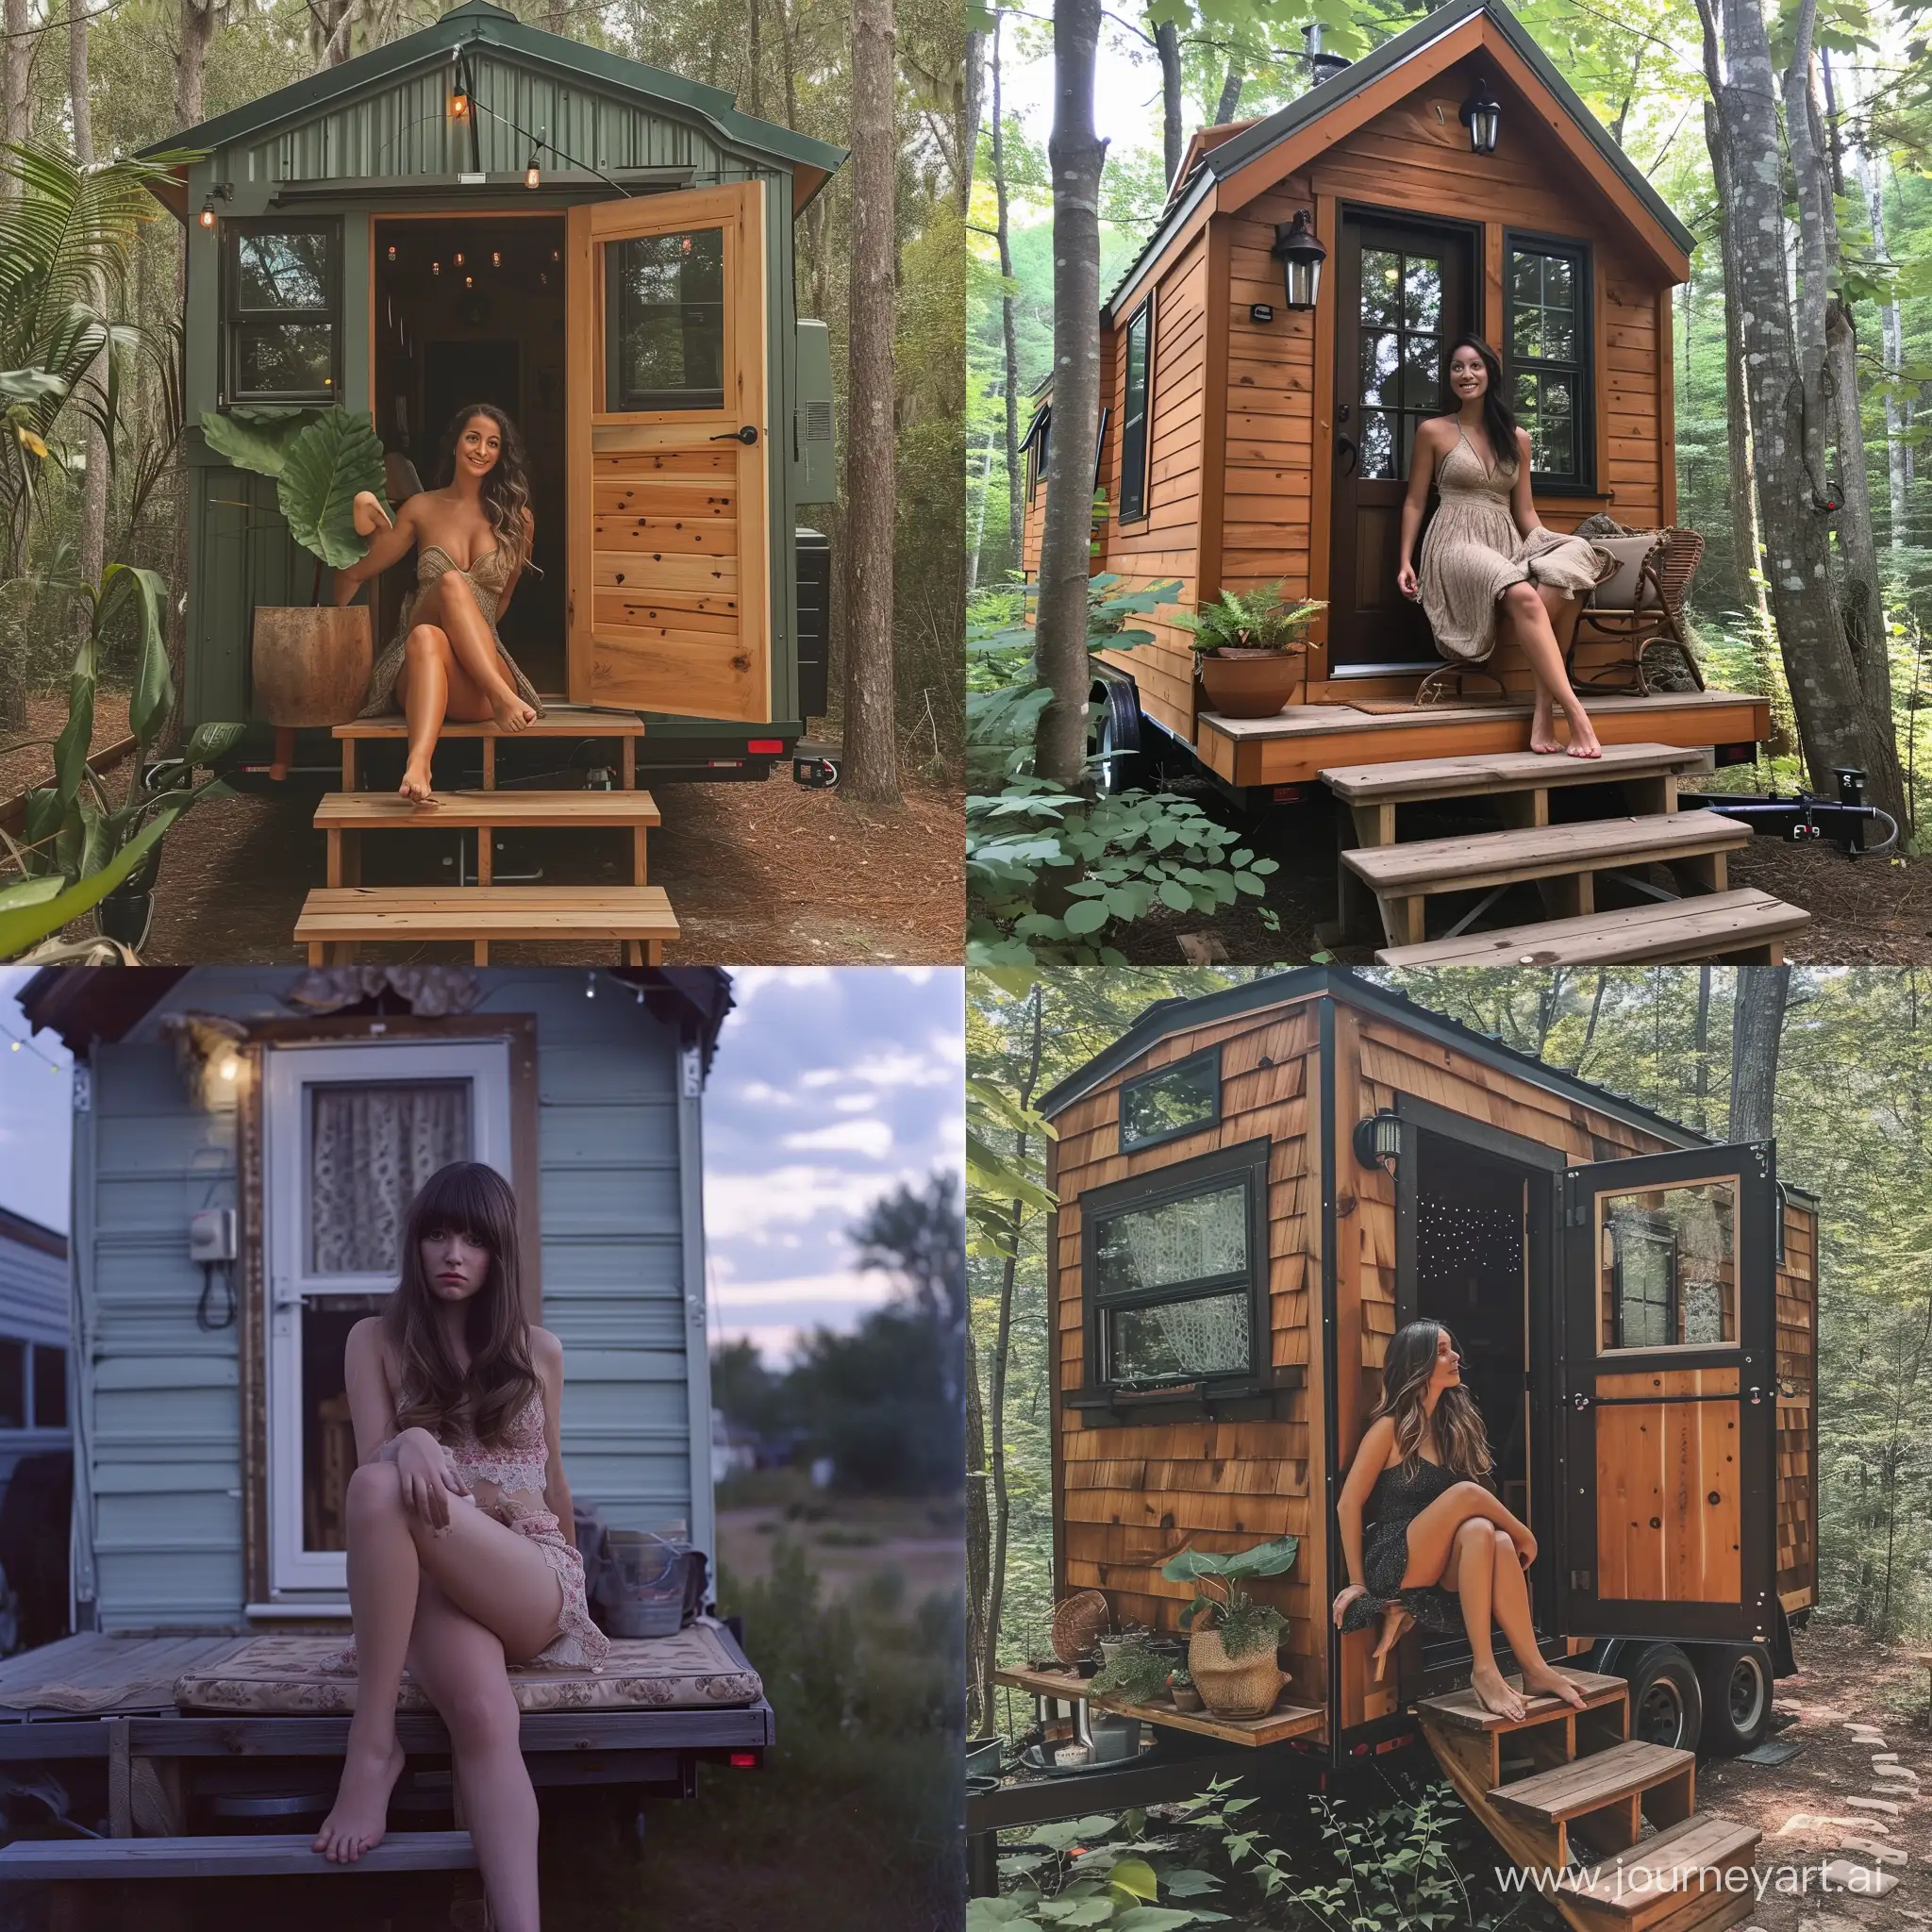 Sensual girl on porch of Tiny house